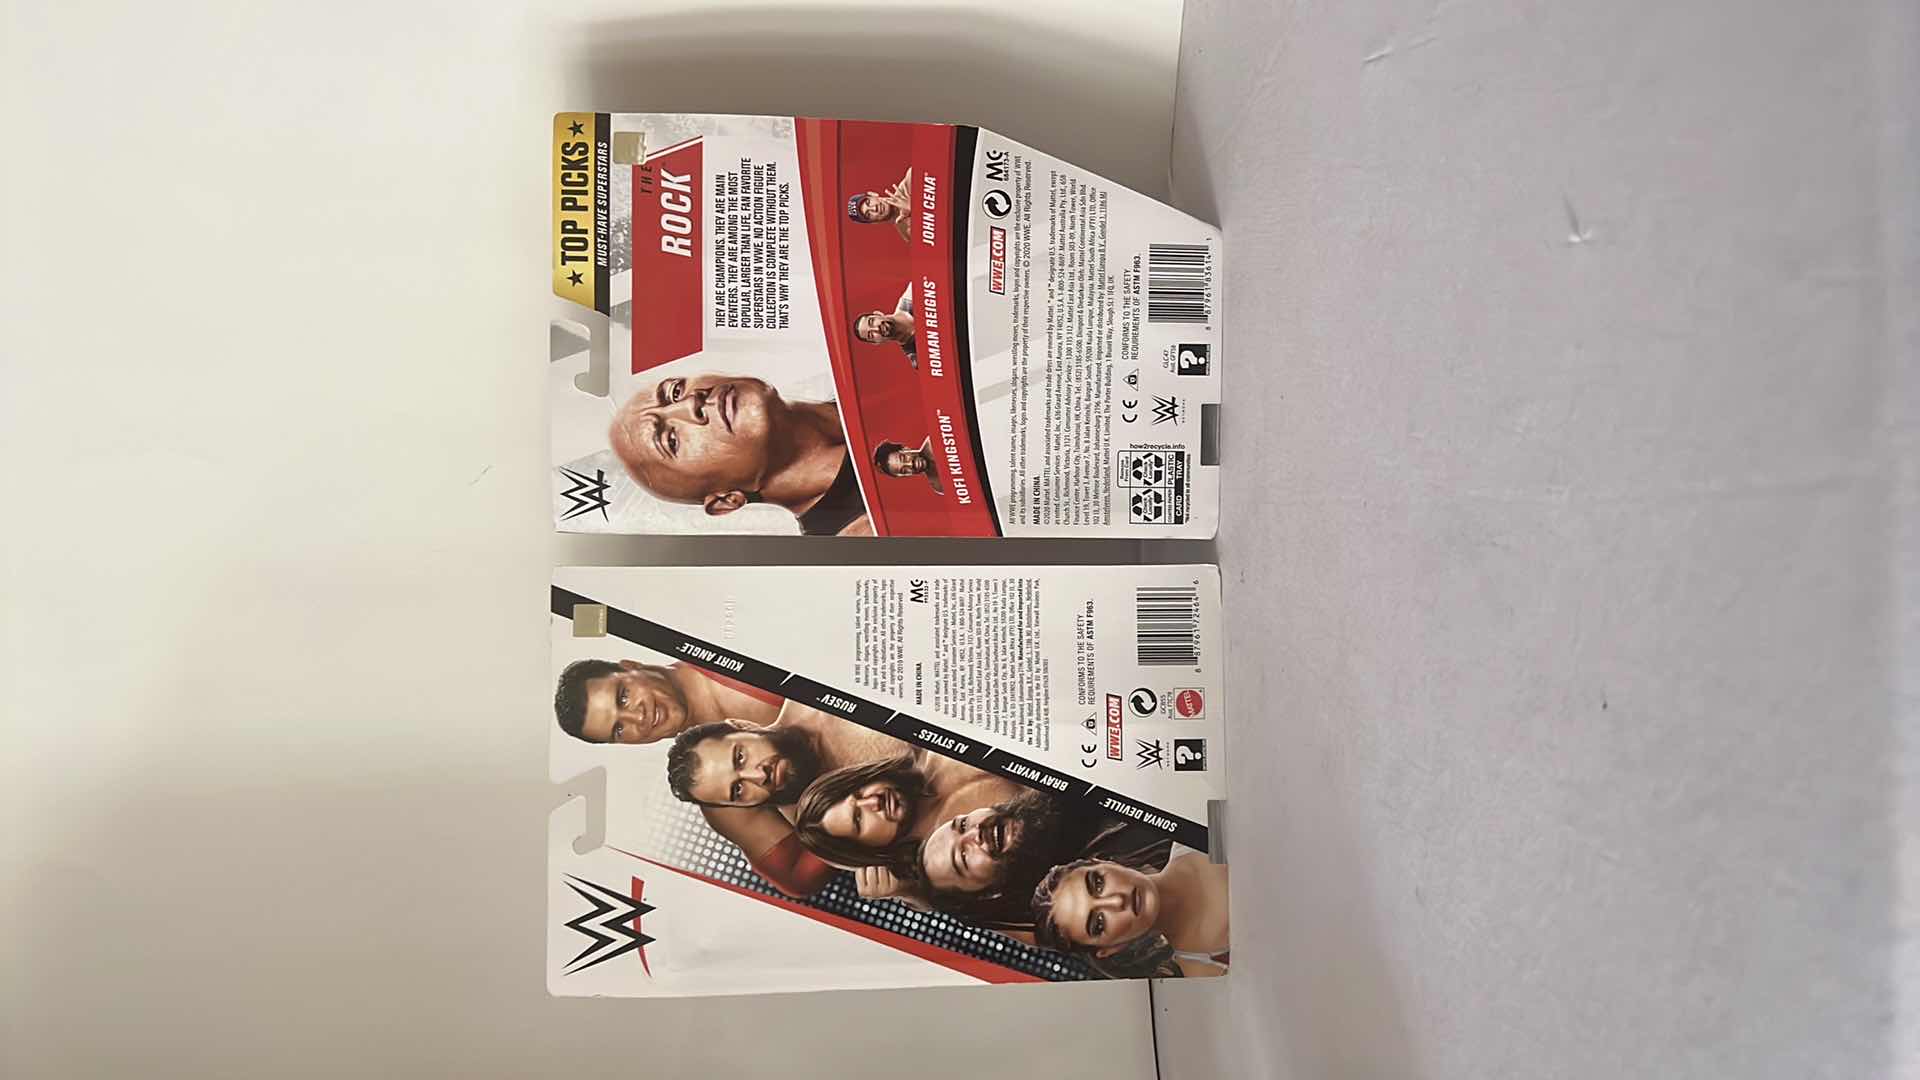 Photo 2 of 2-BRAND NEW MATTEL WWE ACTION FIGURES “THE ROCK & AJ STYLES”  $30